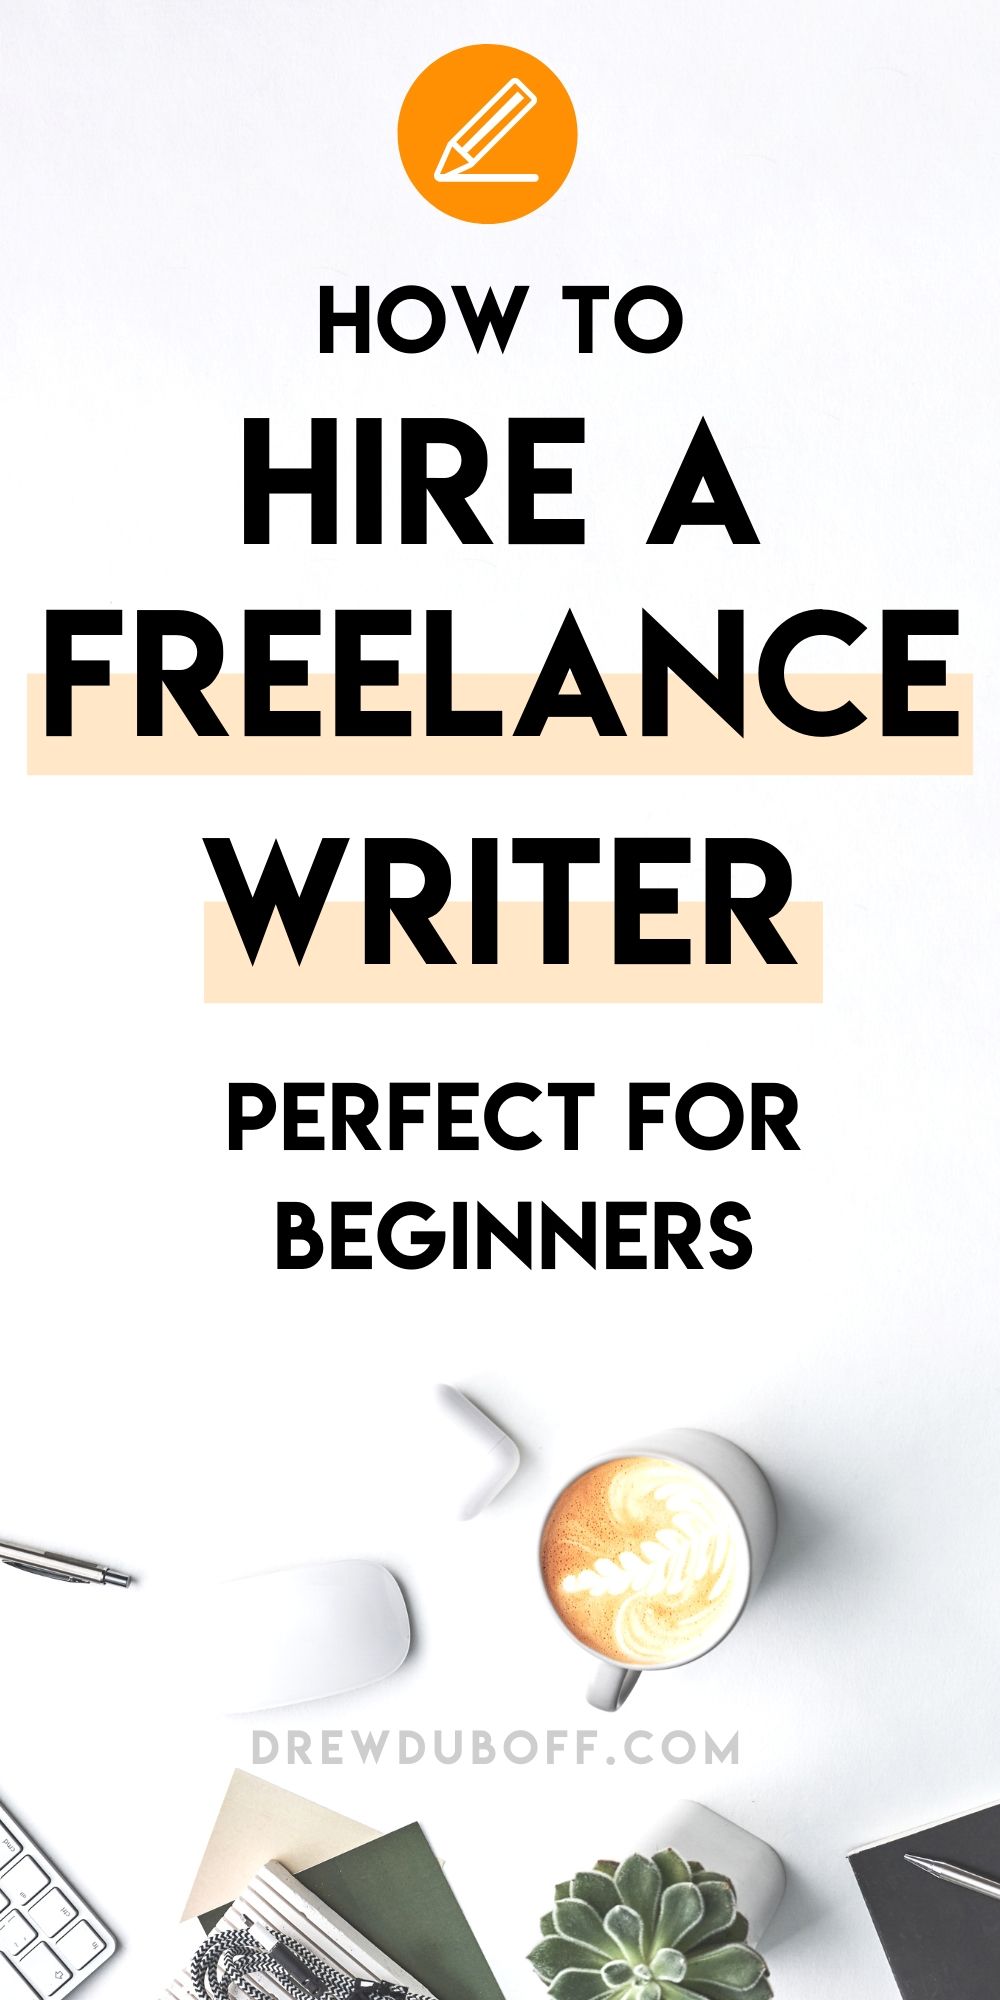 How to Hire a Freelance Writer | Perfect for Beginners